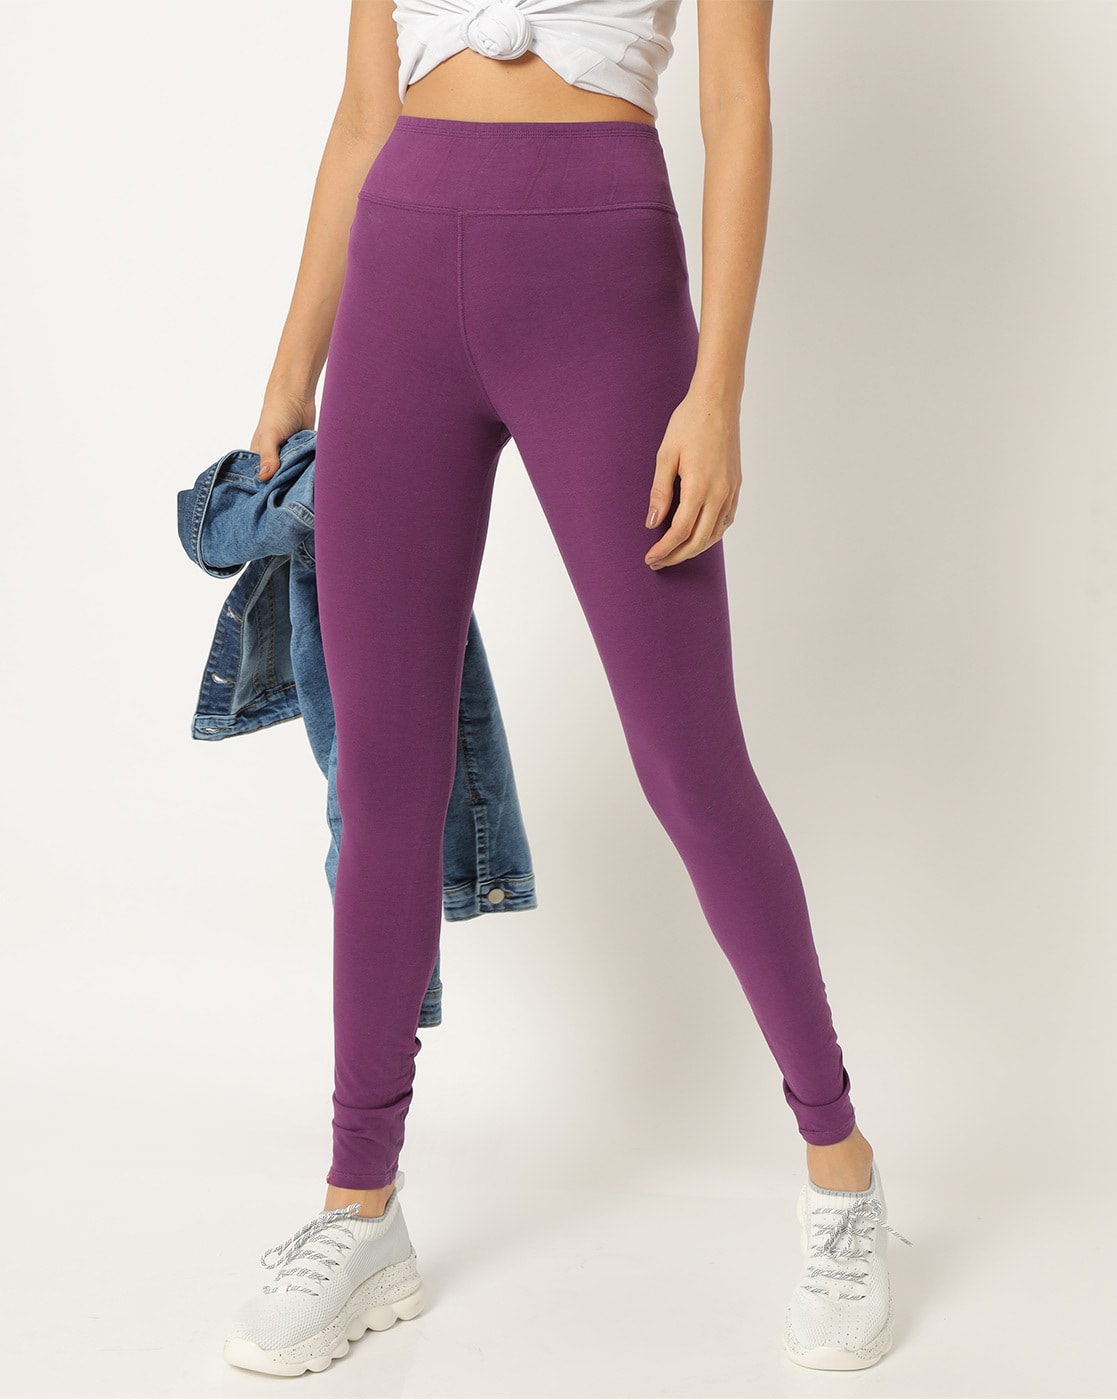 Stretchable Full Embroidery Cotton Legging - Violet @ 77% OFF Rs 411.00  Only FREE Shipping + Extra Discount - Legging, Buy Legging Online,  Stretchable Legging, online Sabse Sasta in India - Leggings for Women -  1307/201 - iStYle99.com